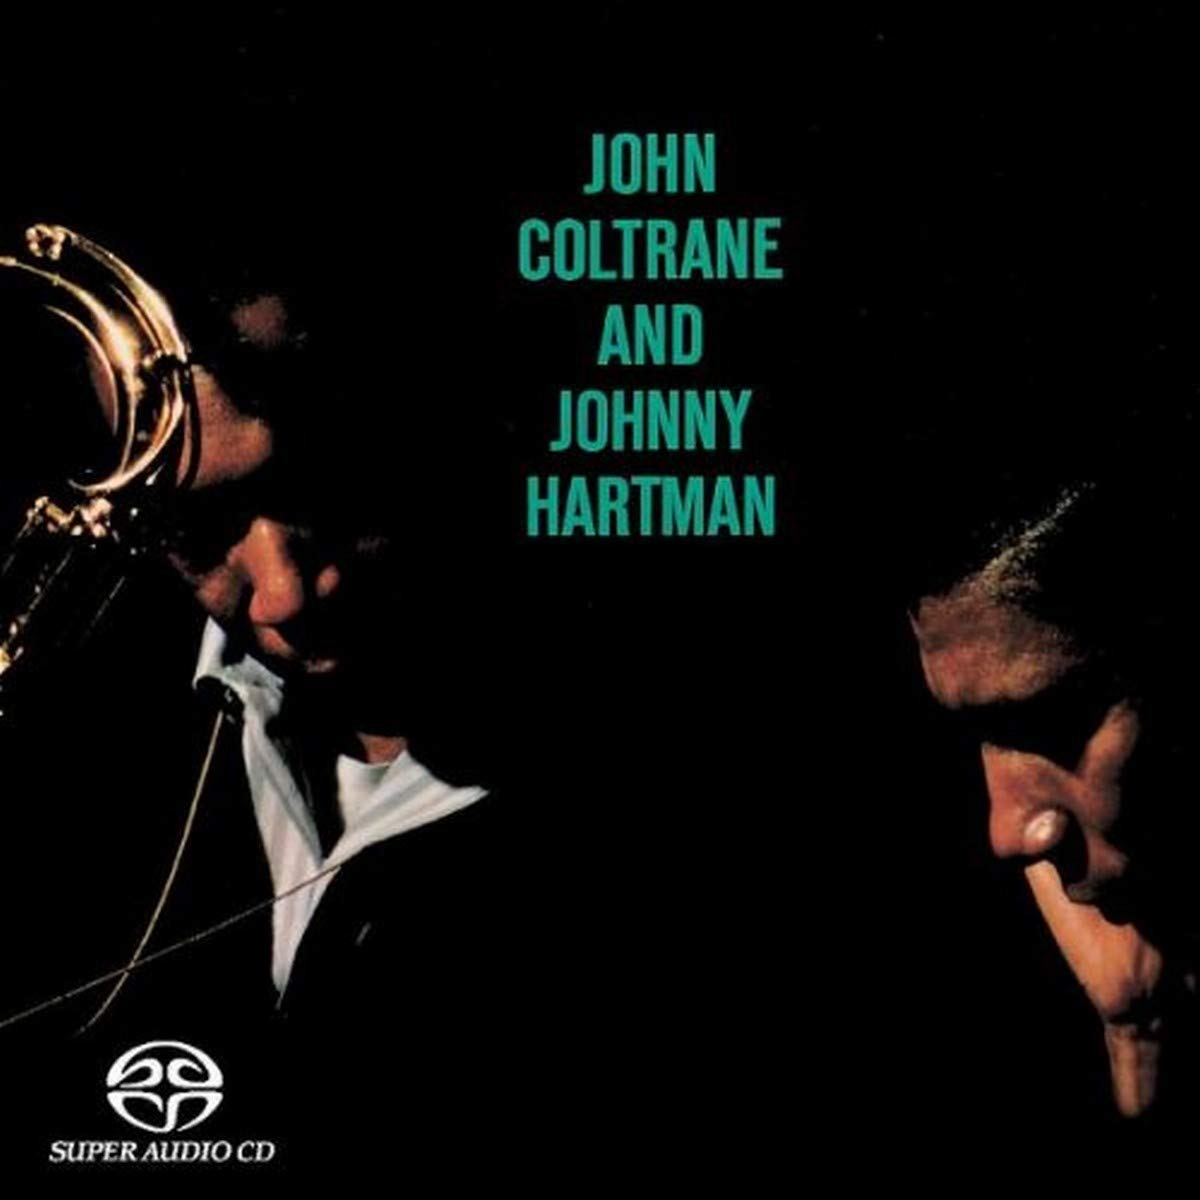 John Coltrane & Johnny Hartman — My one and only love cover artwork